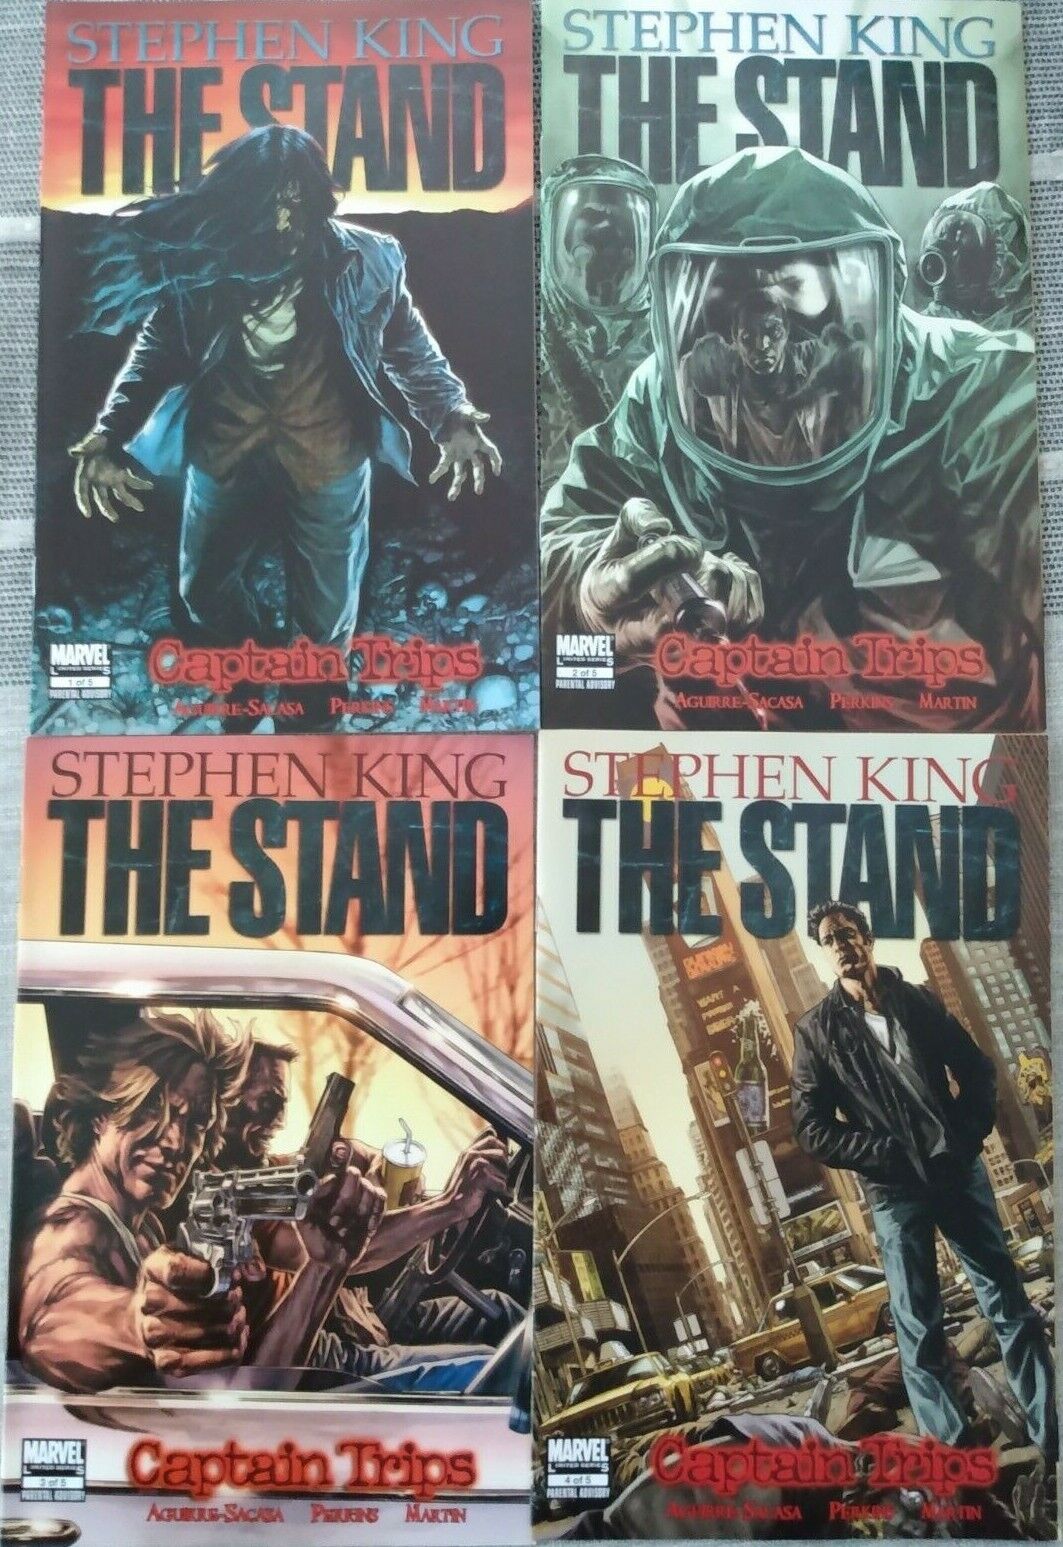 Stephen King's The Stand : Captain Trips #1 #2 #3 #4 of (5) Marvel 2008/09 Comic